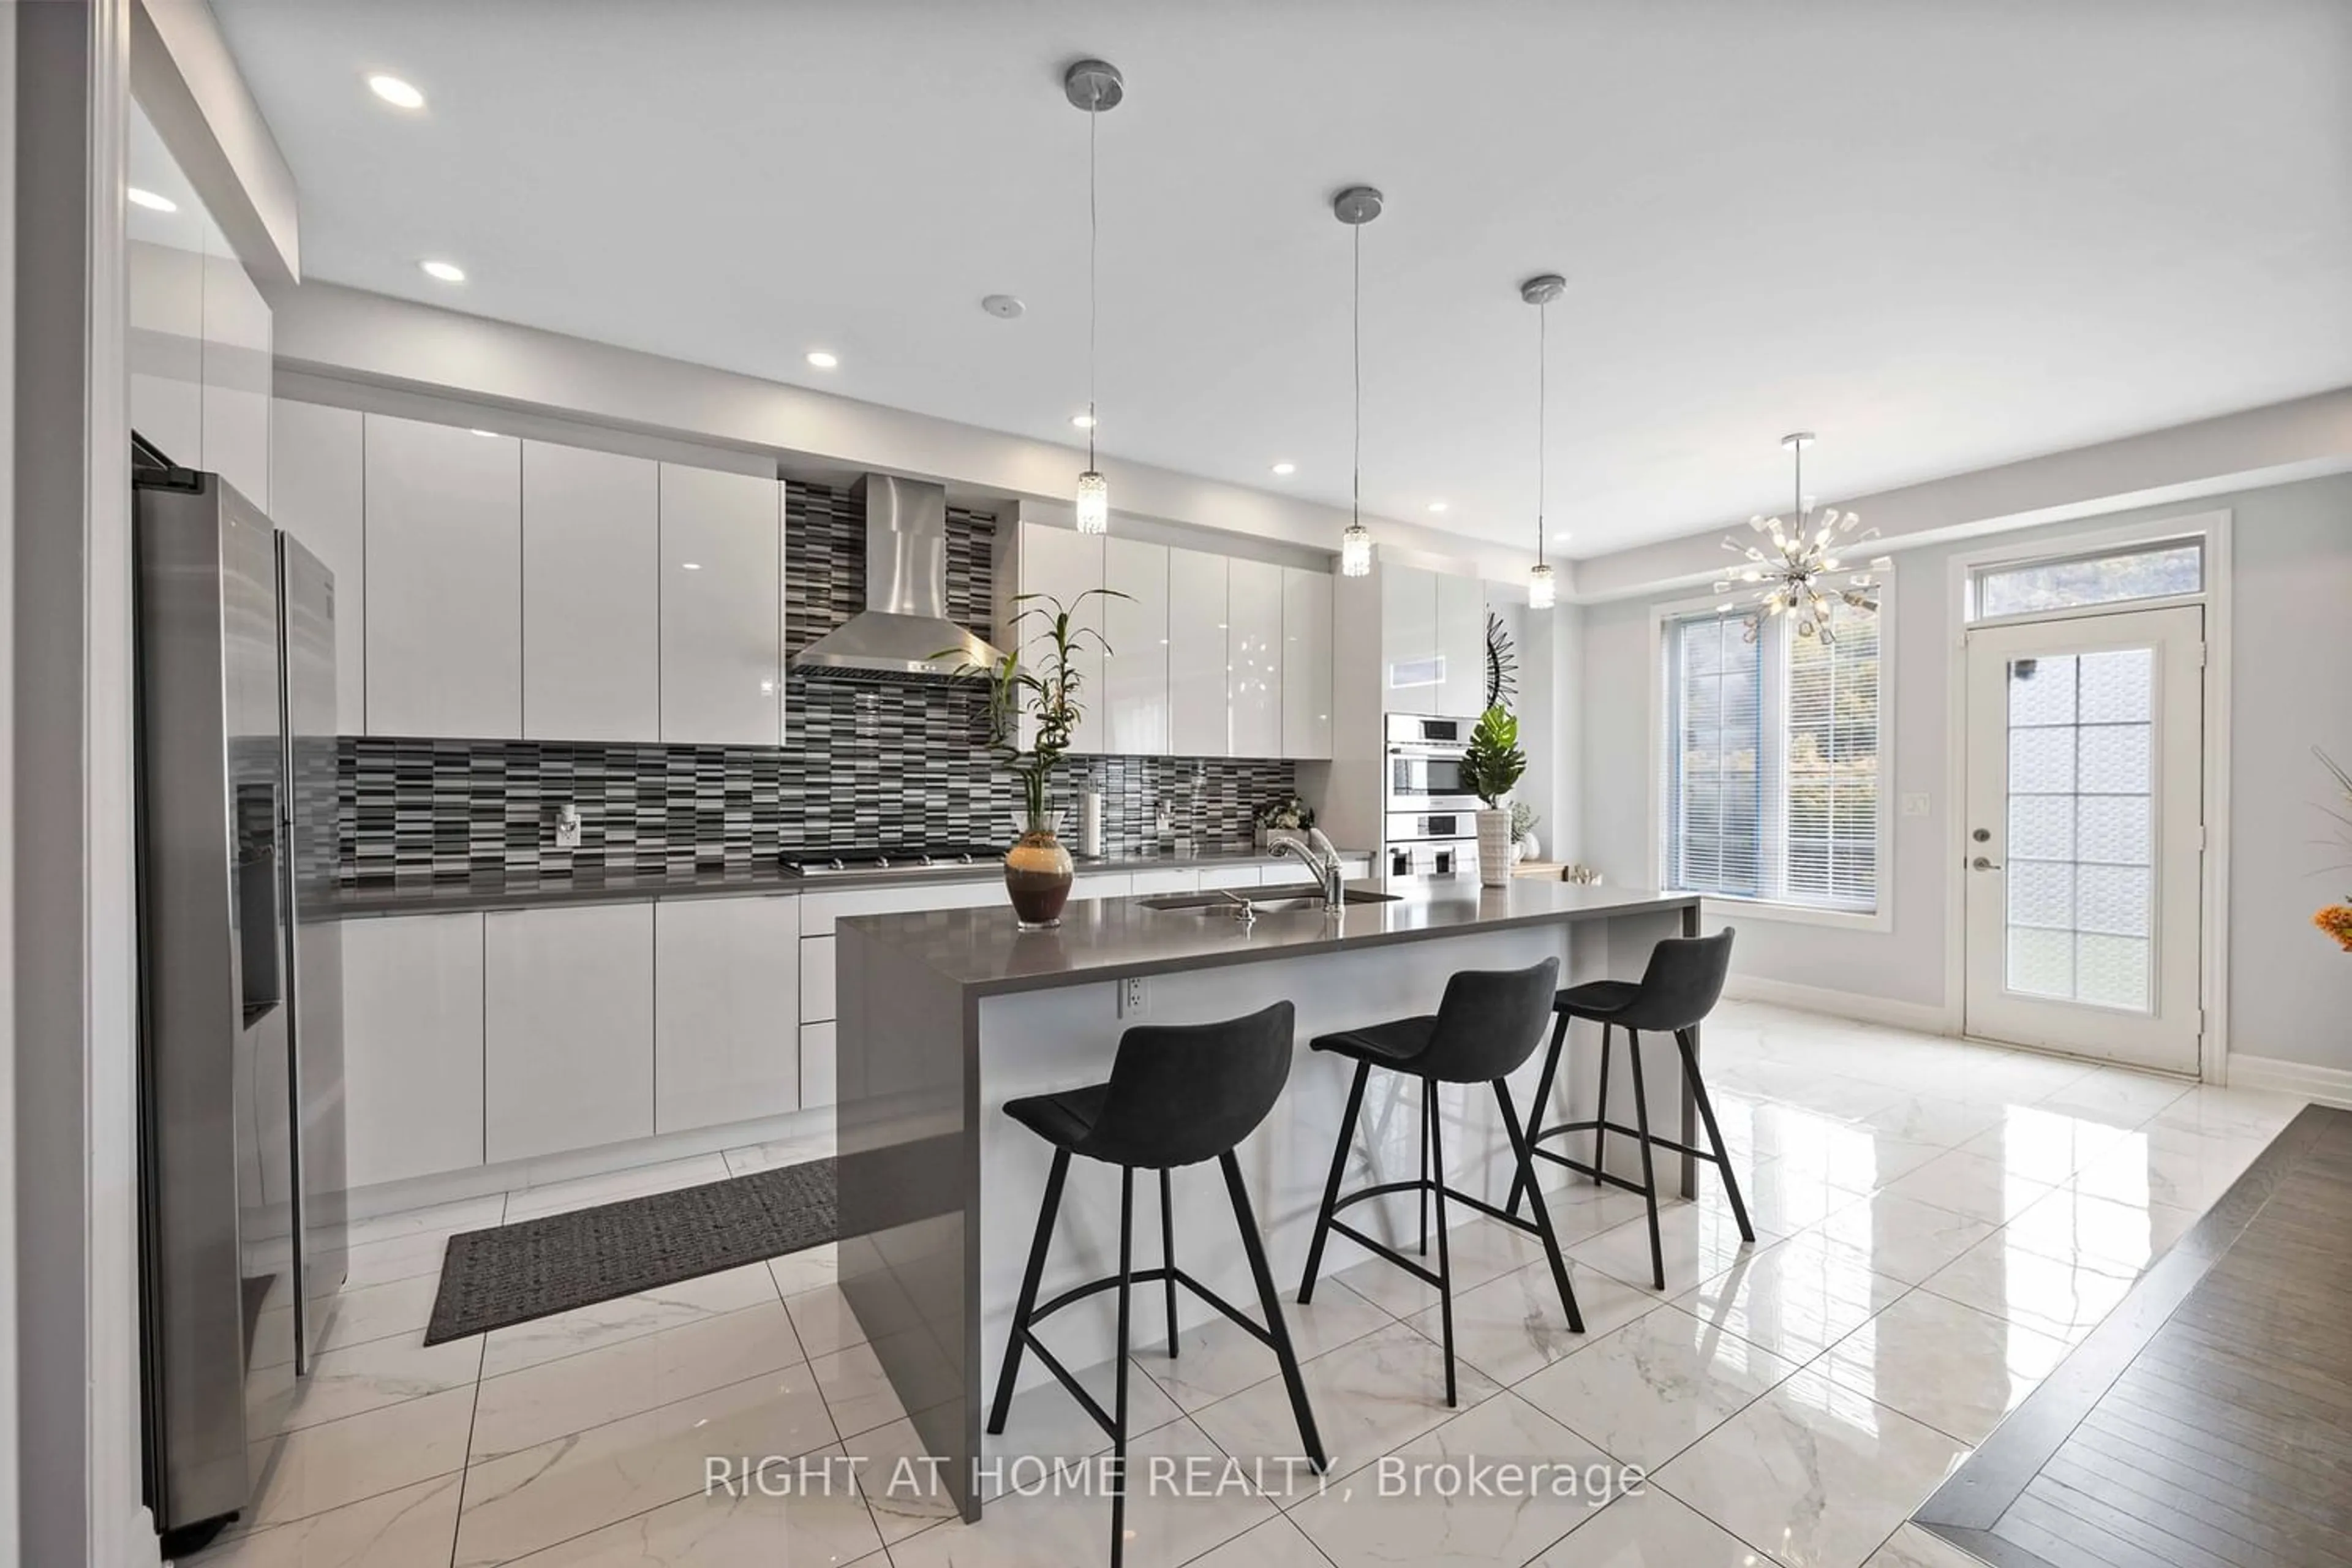 Contemporary kitchen for 11 Prosperity Way, East Gwillimbury Ontario L9N 0V1